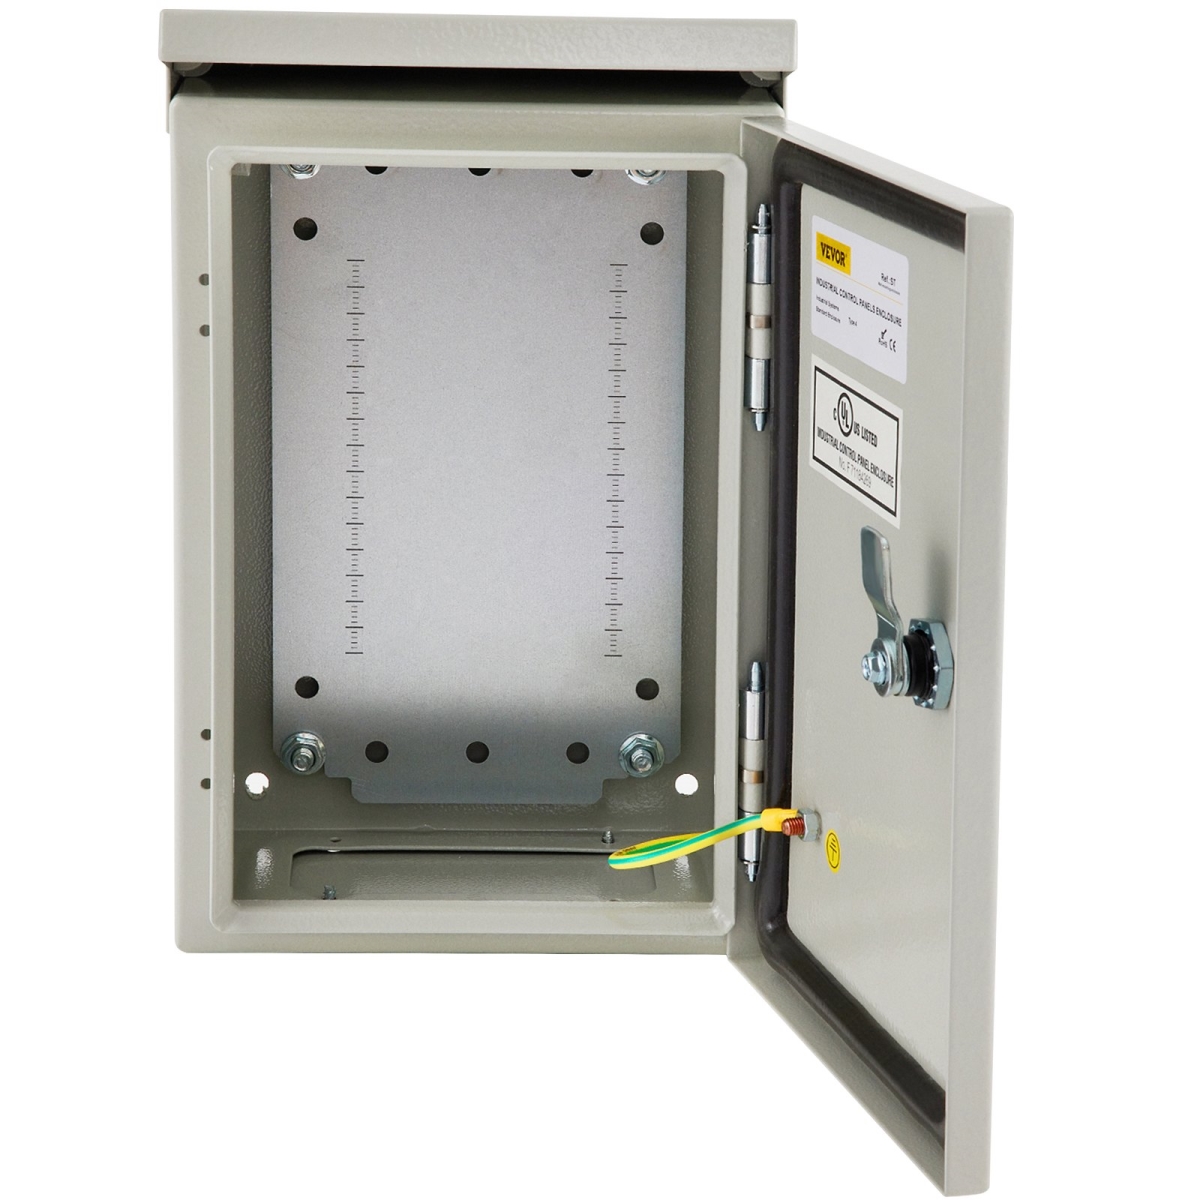 Picture of Vevor TUL40X30X15CMLNKXV0 16 x 12 x 6 in. UL Certified NEMA 4 Outdoor Electrical Enclosure